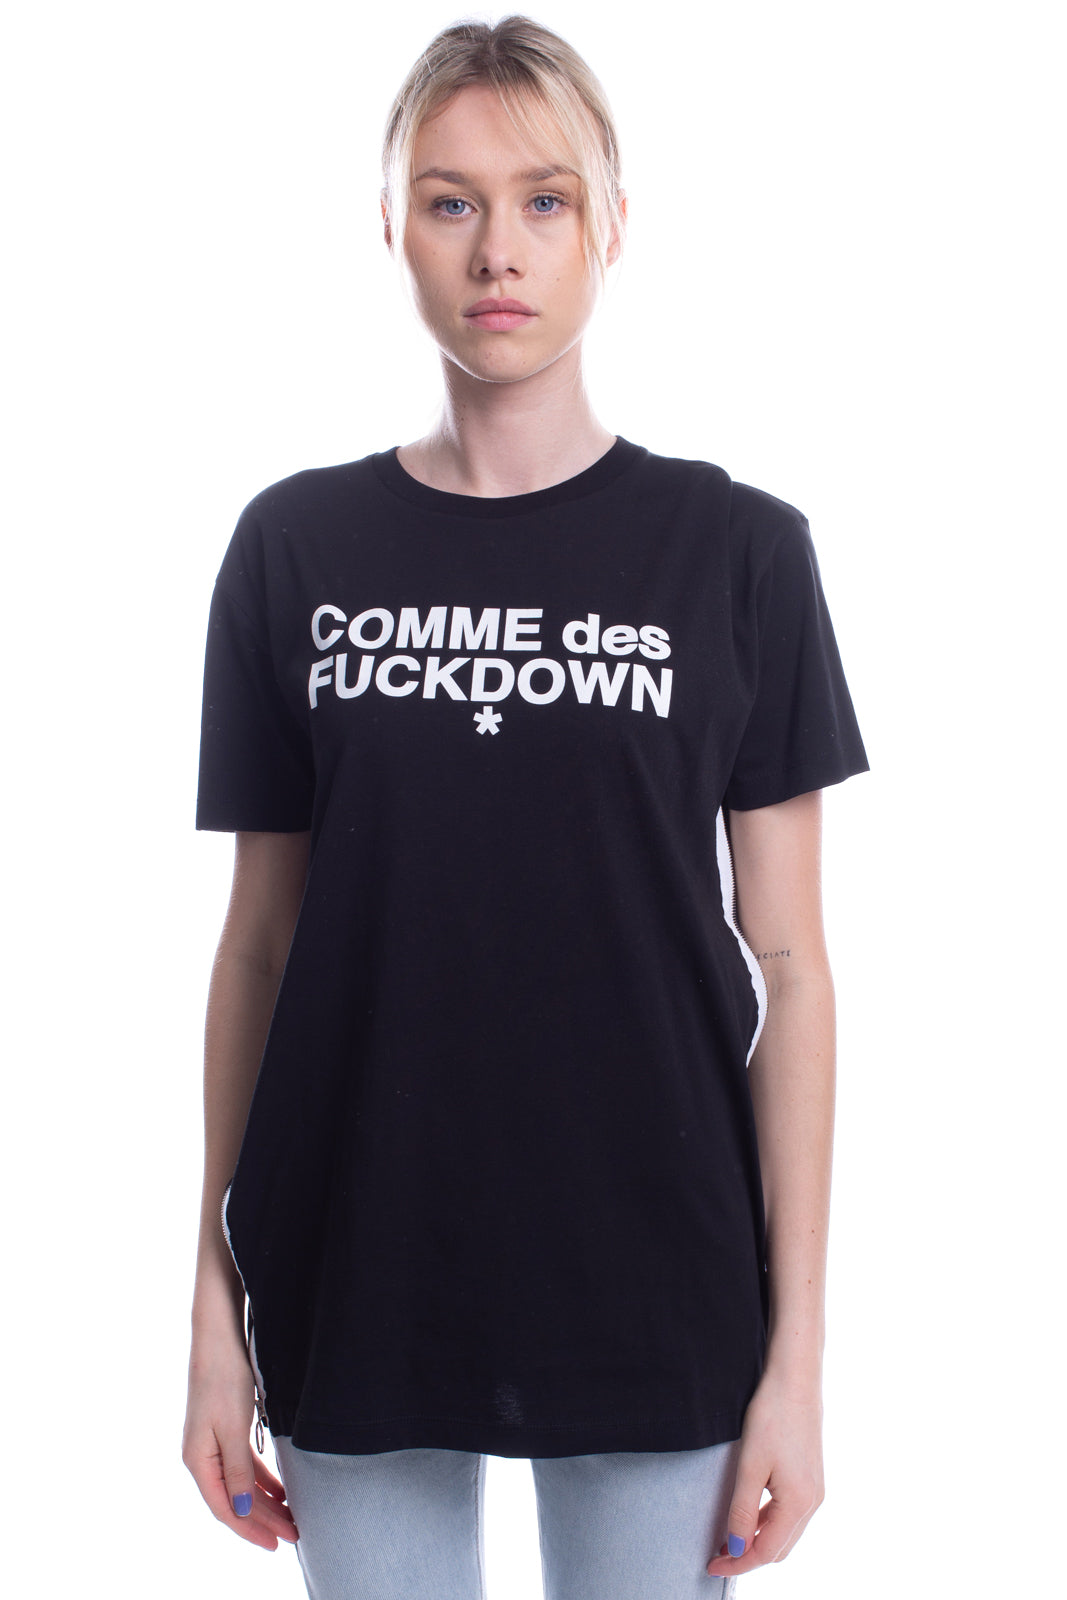 COMME DES F*CKDOWN T-Shirt Top Size M Zipped Sides Short Sleeve gallery main photo